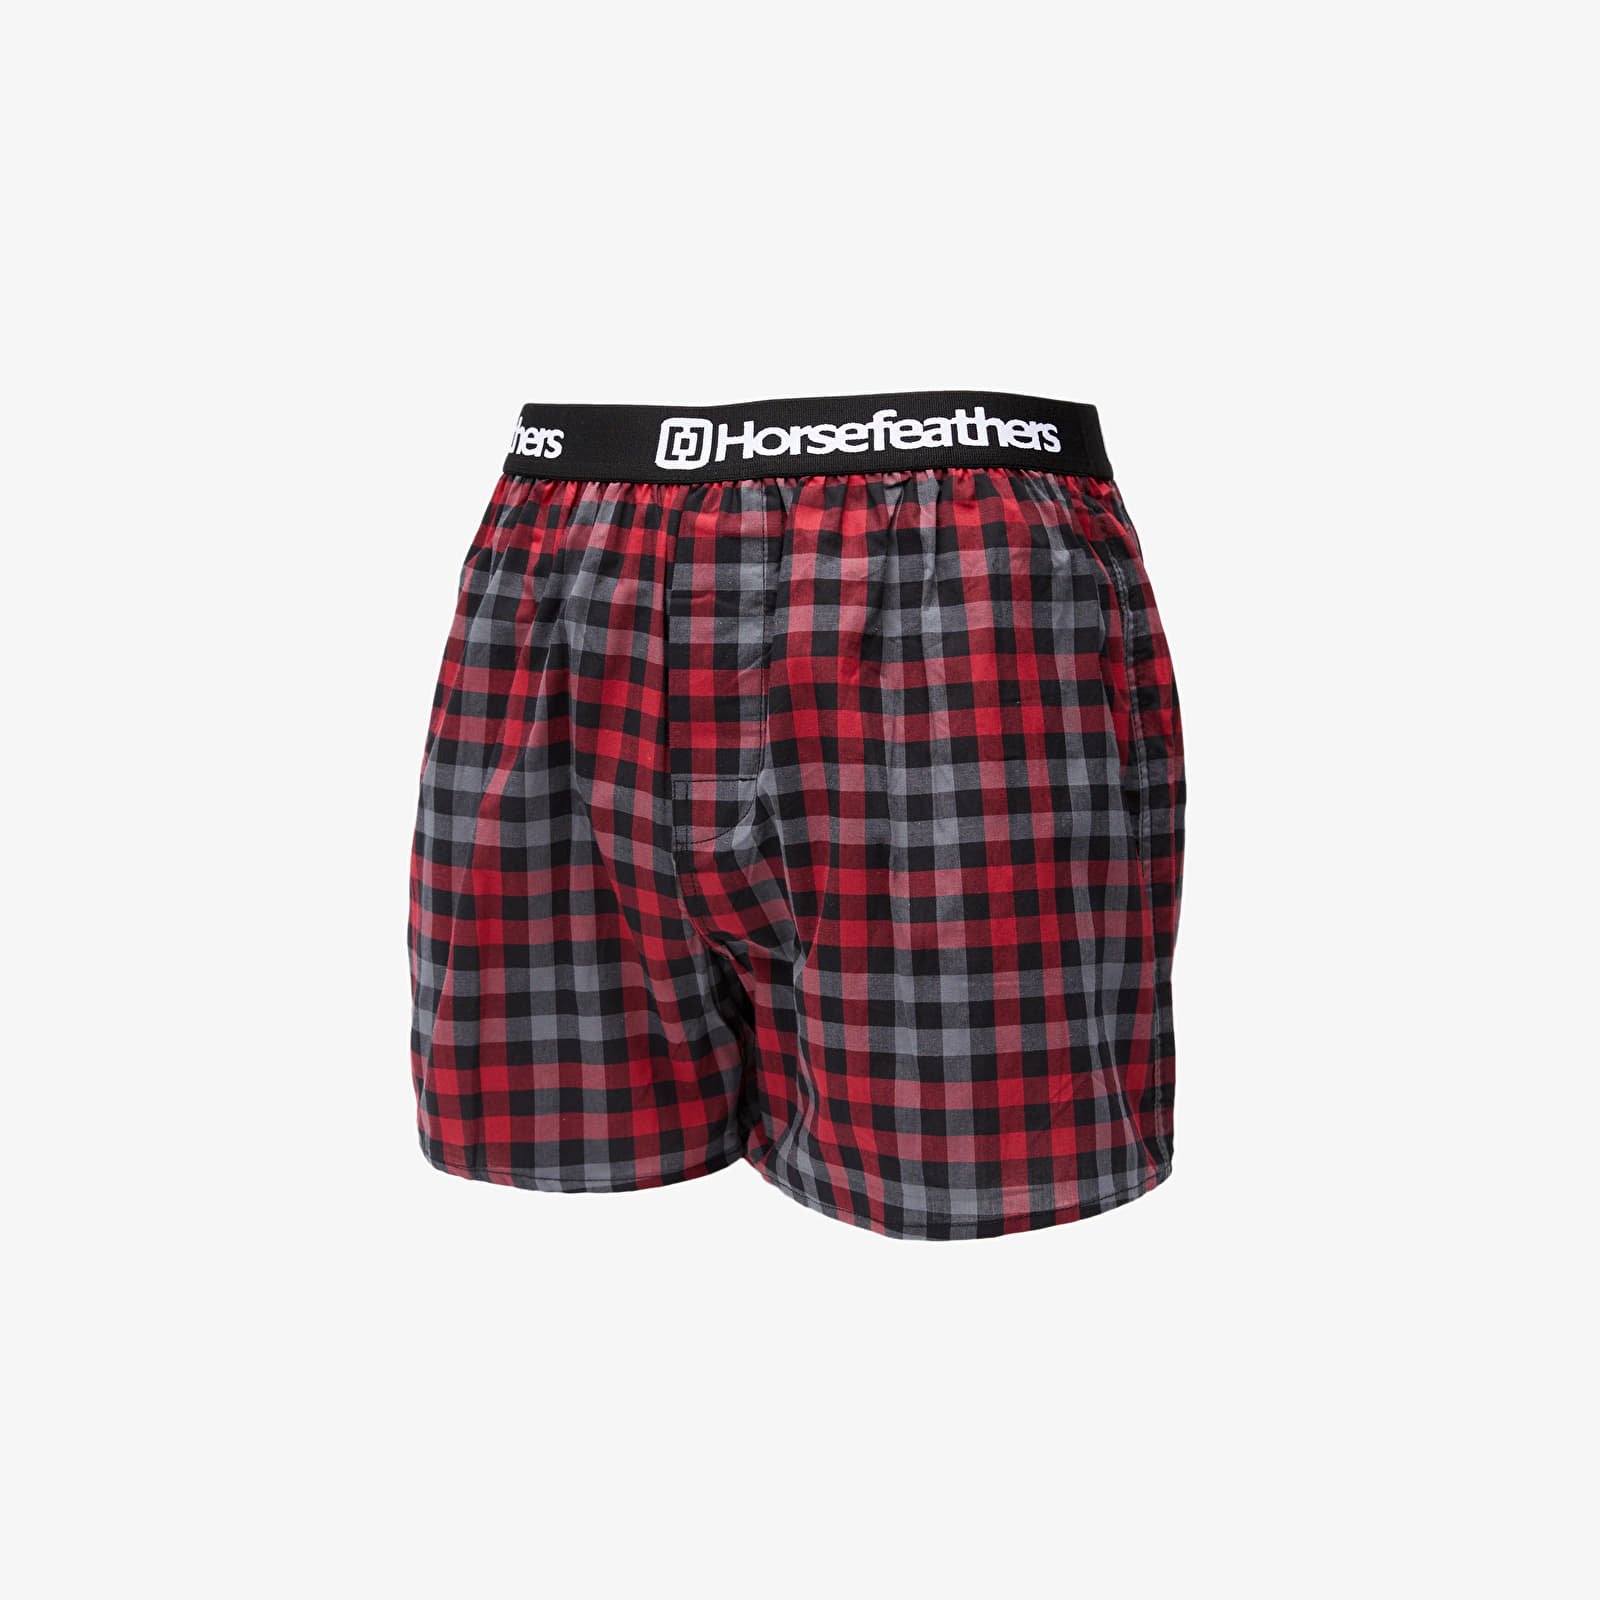 Trunks Horsefeathers Clay Boxer Shorts Charcoal